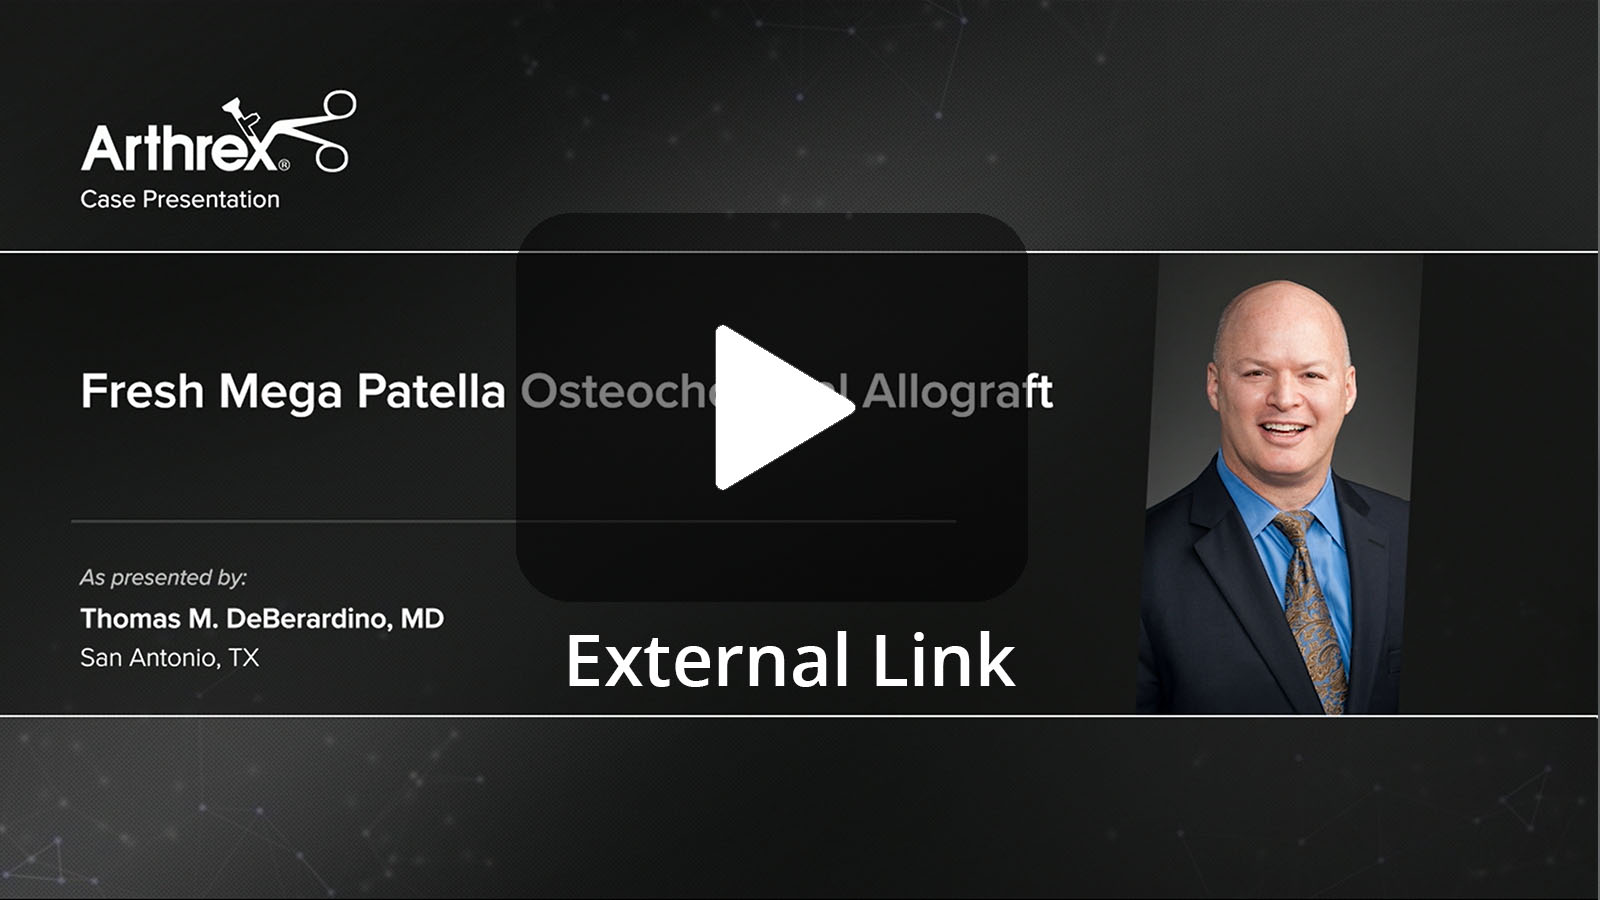 Thomas M. DeBerardino, MD presents a complex case that included an anterior cruciate ligament (ACL) revision, high-tibial osteotomy, medial meniscus allograft transplant, and fresh osteochondral allograft of the patella. Dr. DeBerardino includes several technical pearls when performing complex procedures, such as creating a GraftLink® Tendon construct. (External Link)